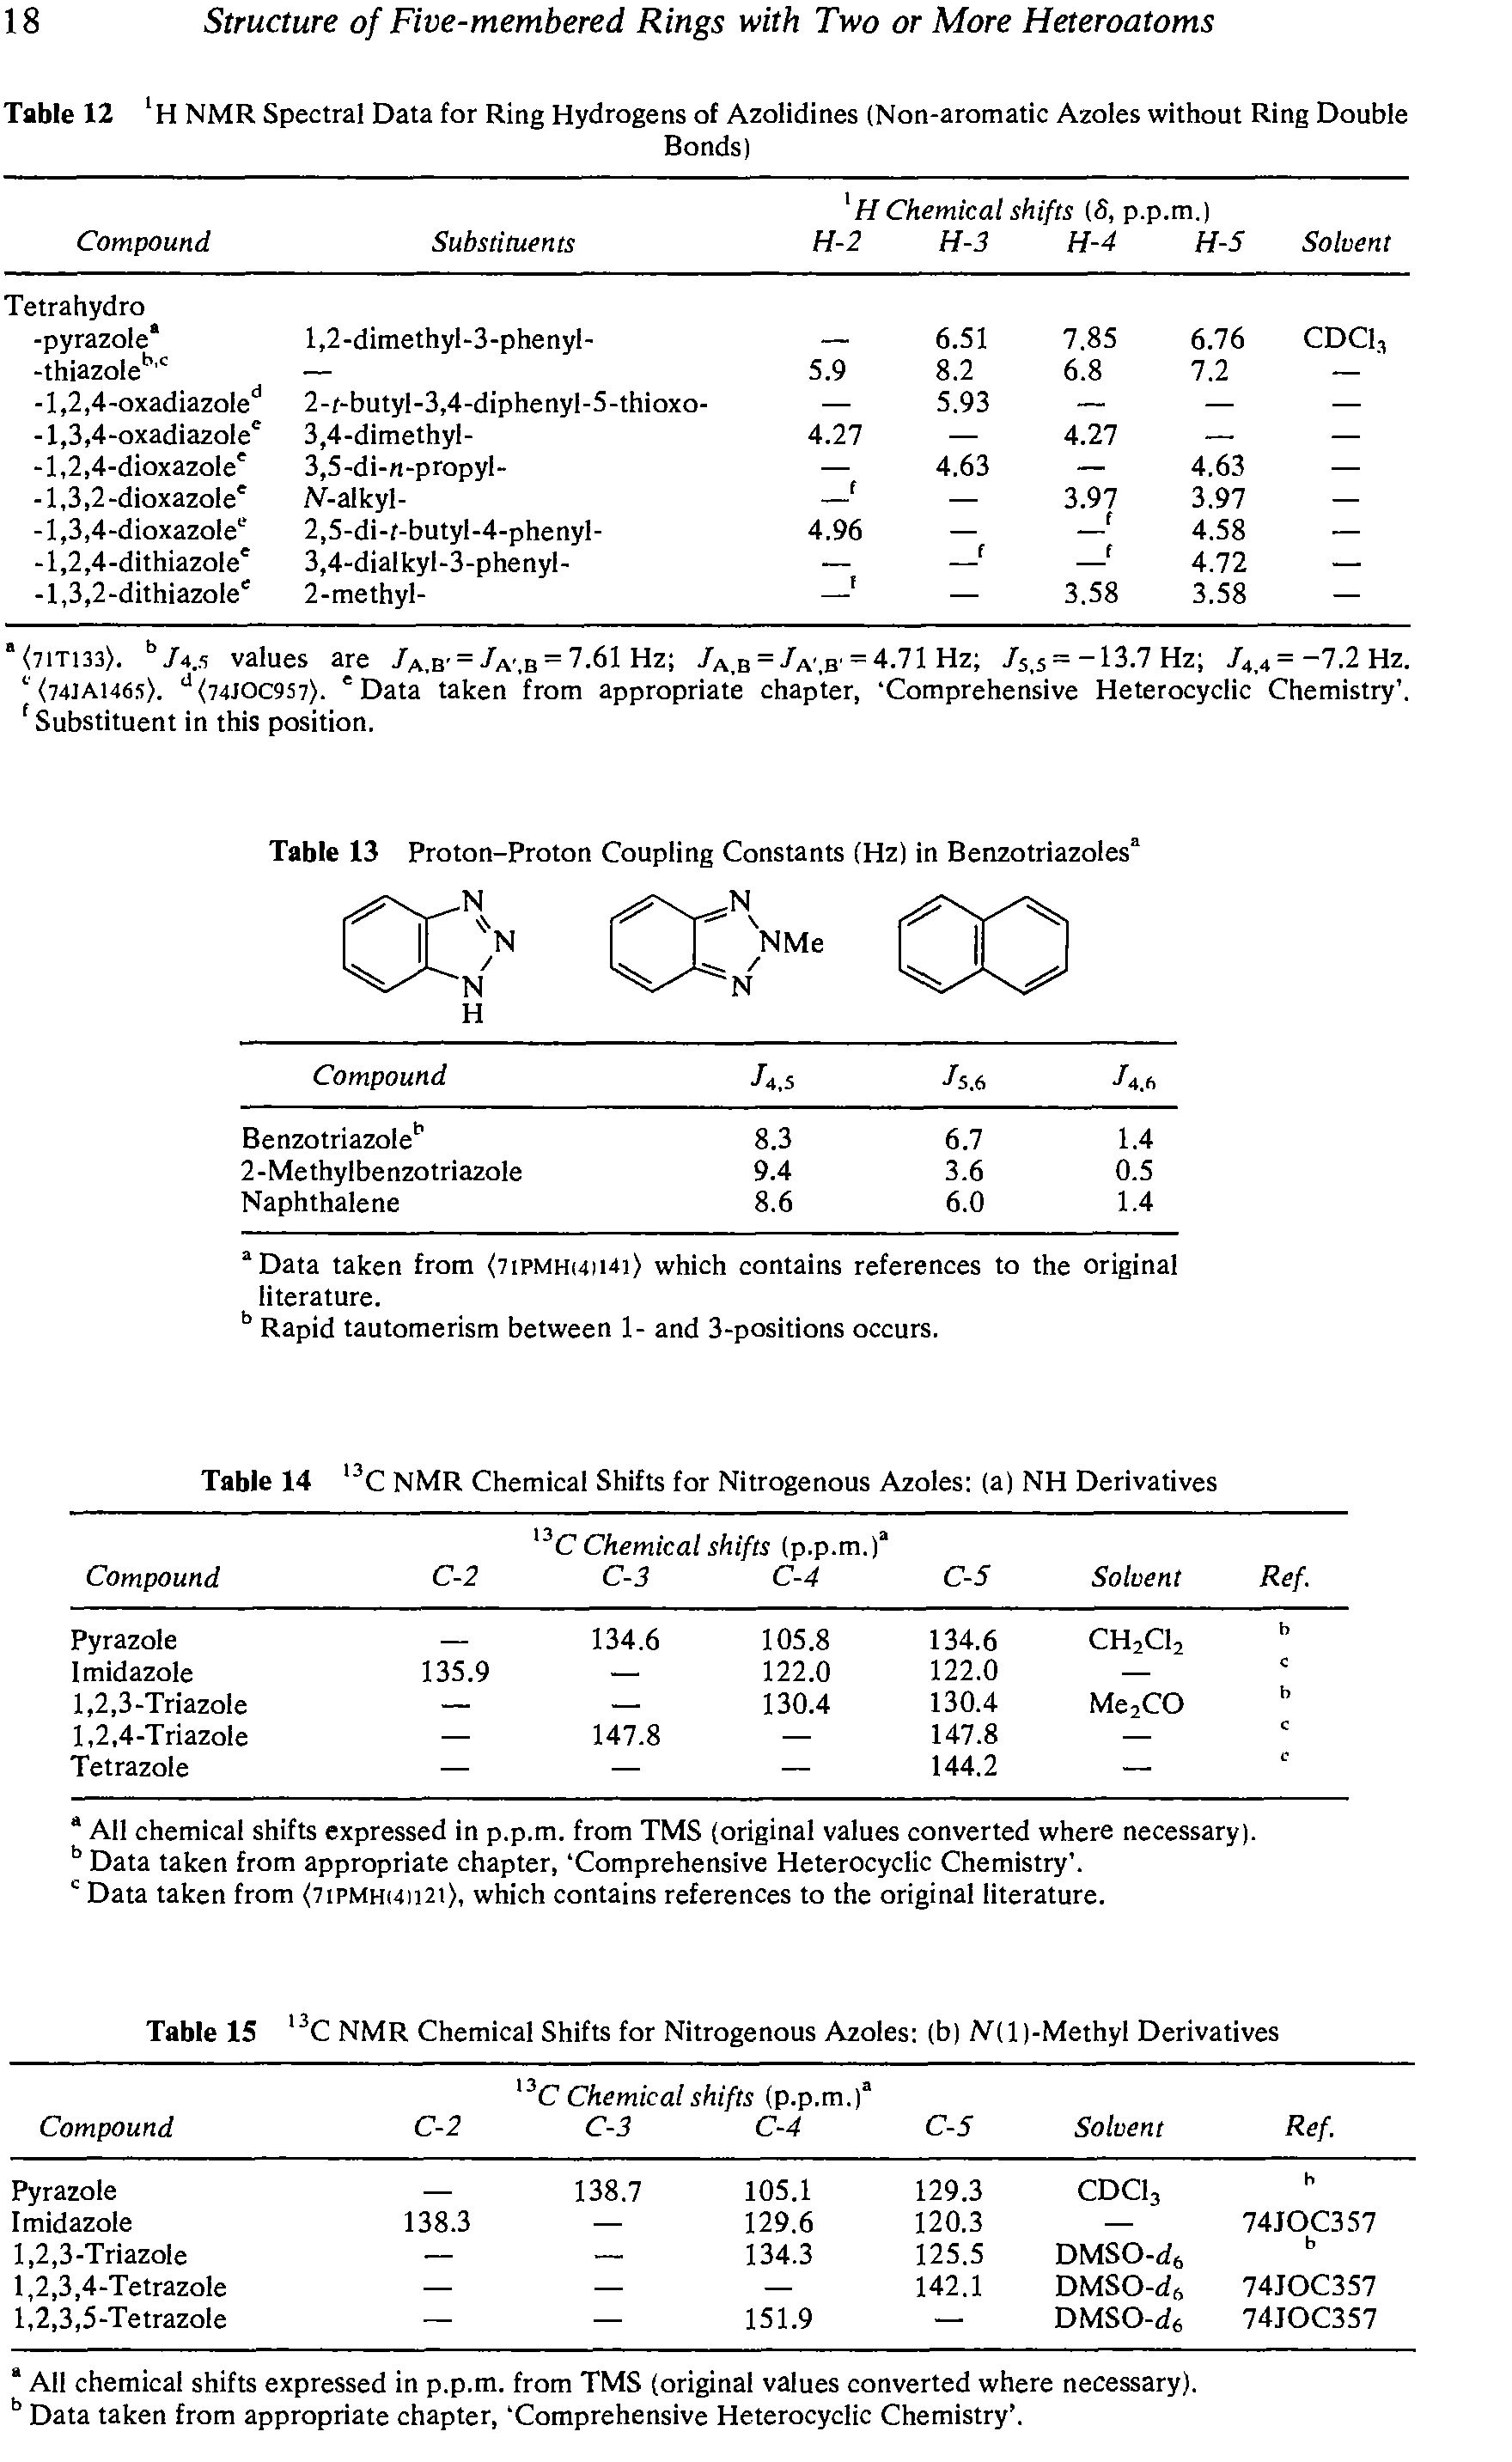 Table 14 C NMR Chemical Shifts for Nitrogenous Azoles (a) NH Derivatives...